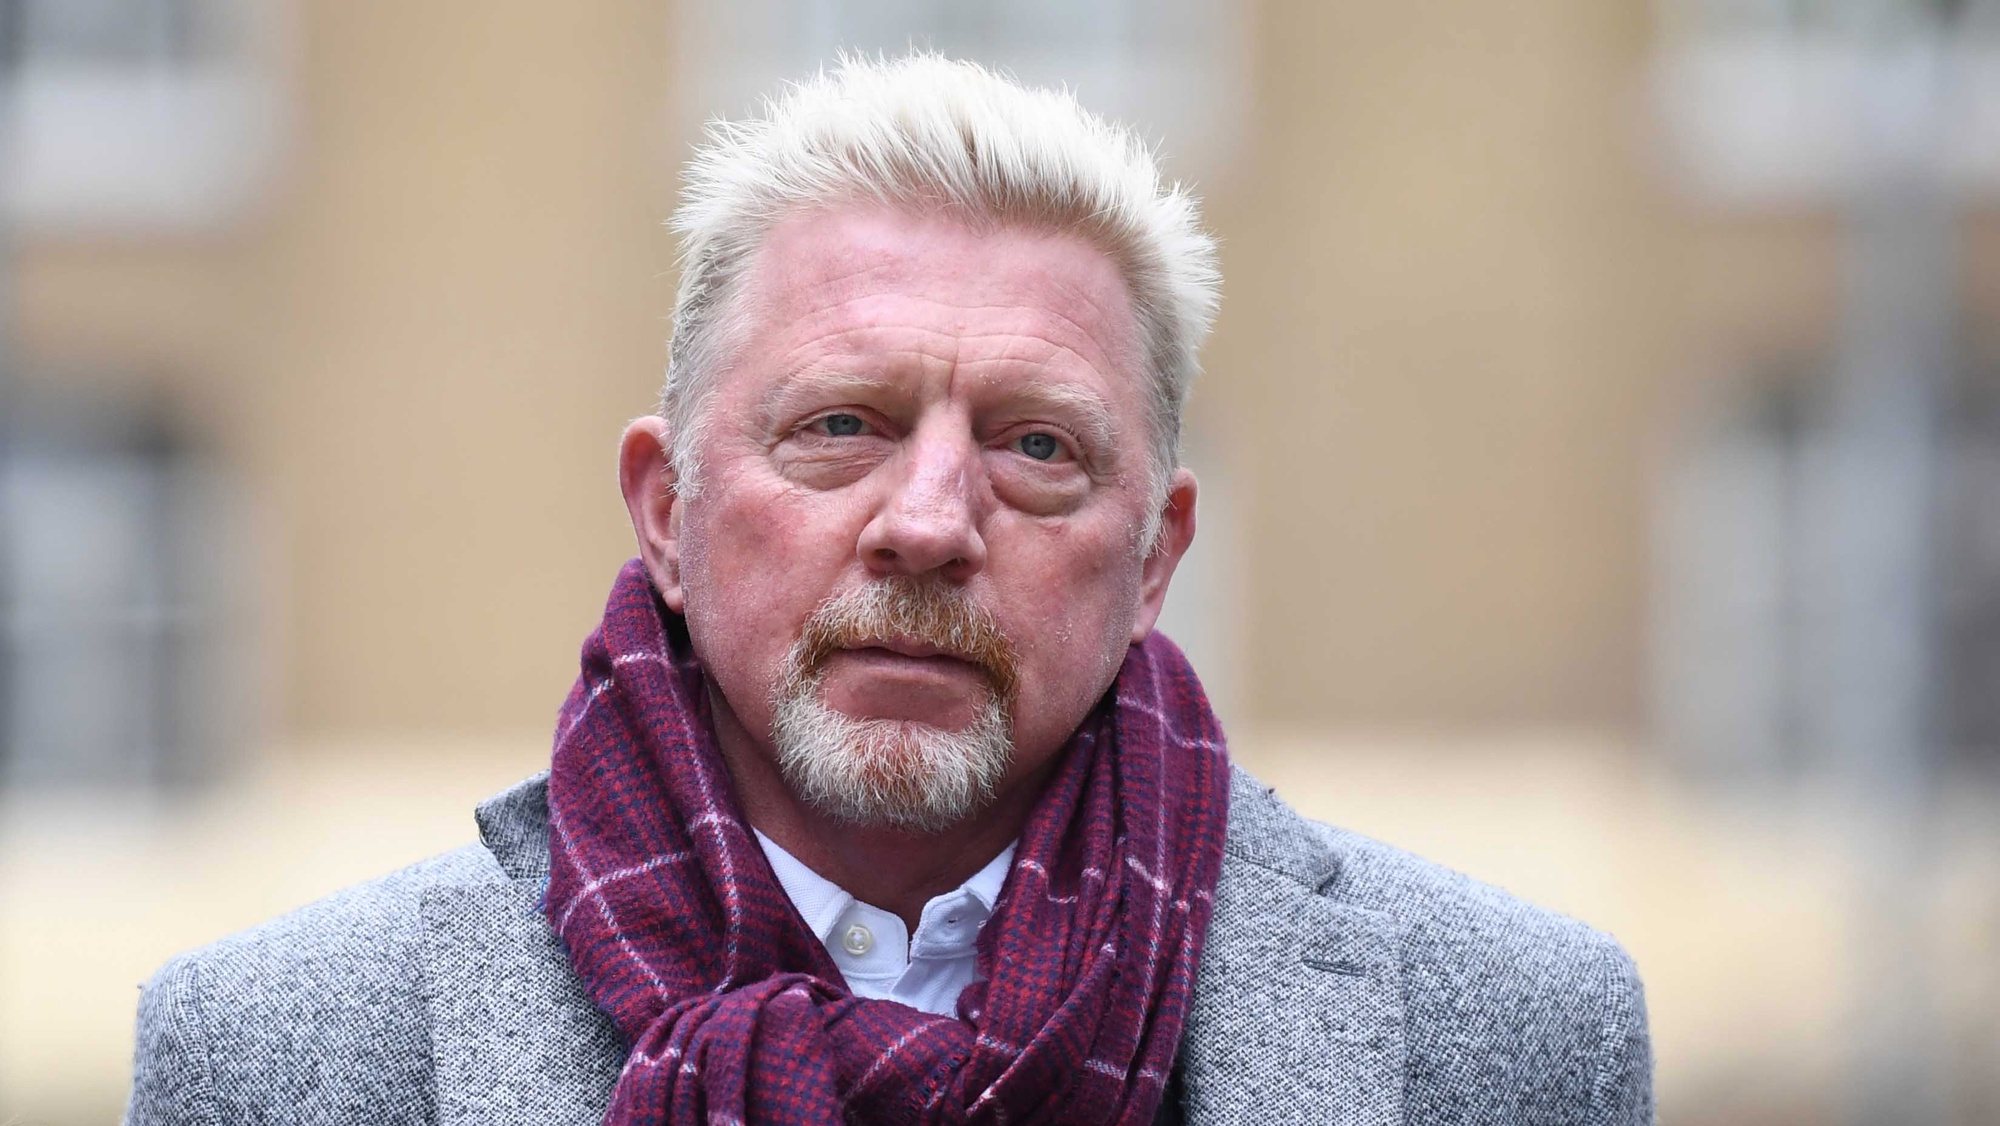 epa09877892 Former tennis Champion and sports commentator Boris Becker arrives at Southwark Crown Court in London, Britain, 08 April 2022. Becker is in court after declaring bankruptcy. The six-time Grand Slam champion is accused of having &#039;acted dishonestly&#039; when he failed to hand over trophies and medals, including his Wimbledon titles, to pay off his debts, the court heard on 21 March. Becker was declared bankrupt in June 2017.  EPA/NEIL HALL